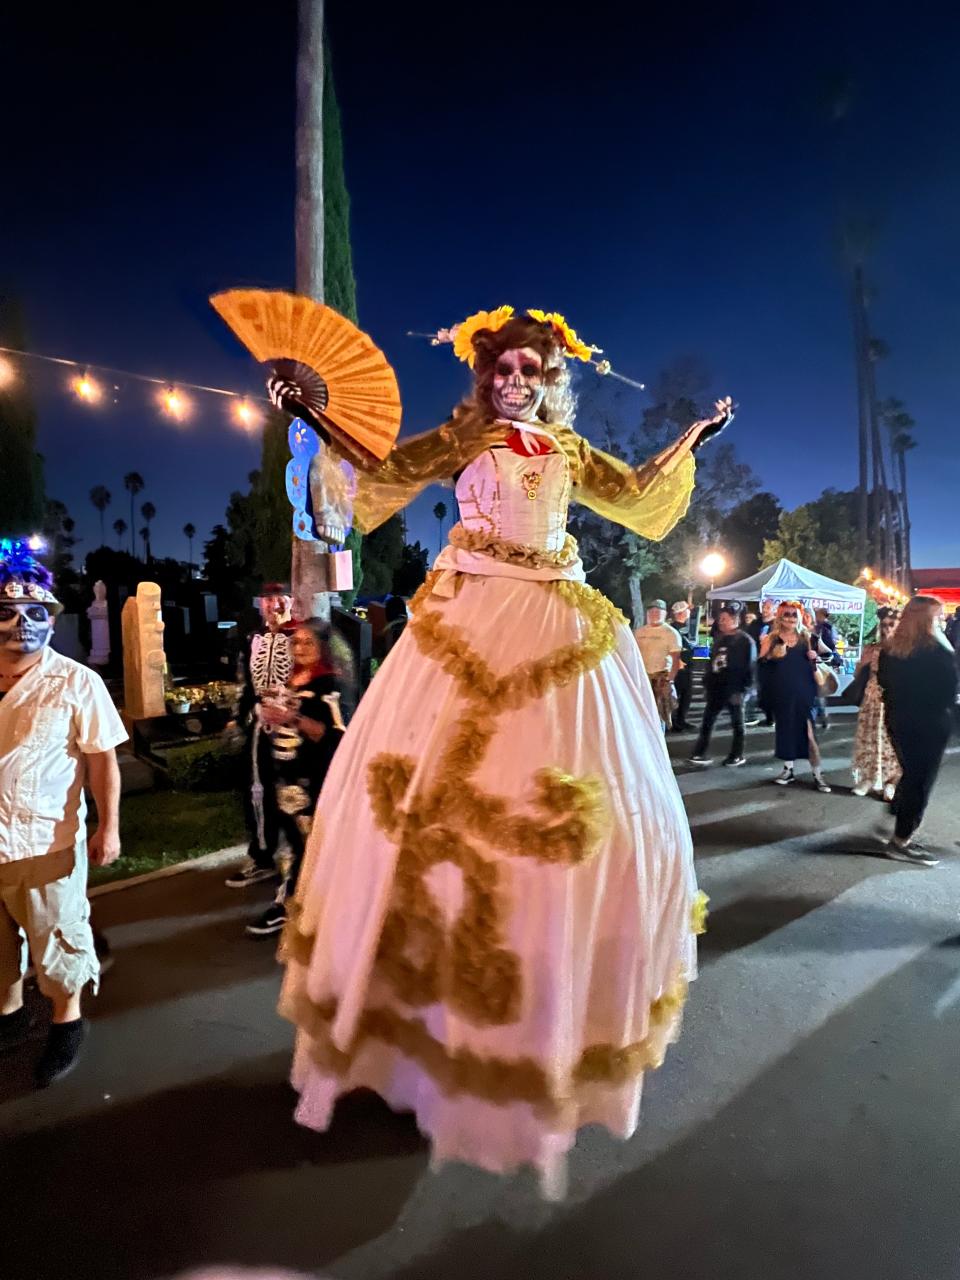 A woman dressed up and walking on stilts poses during the Día de Los Muertos celebration at the Hollywood Forever Cemetery in Los Angeles on Saturday, Oct. 28, 2023.